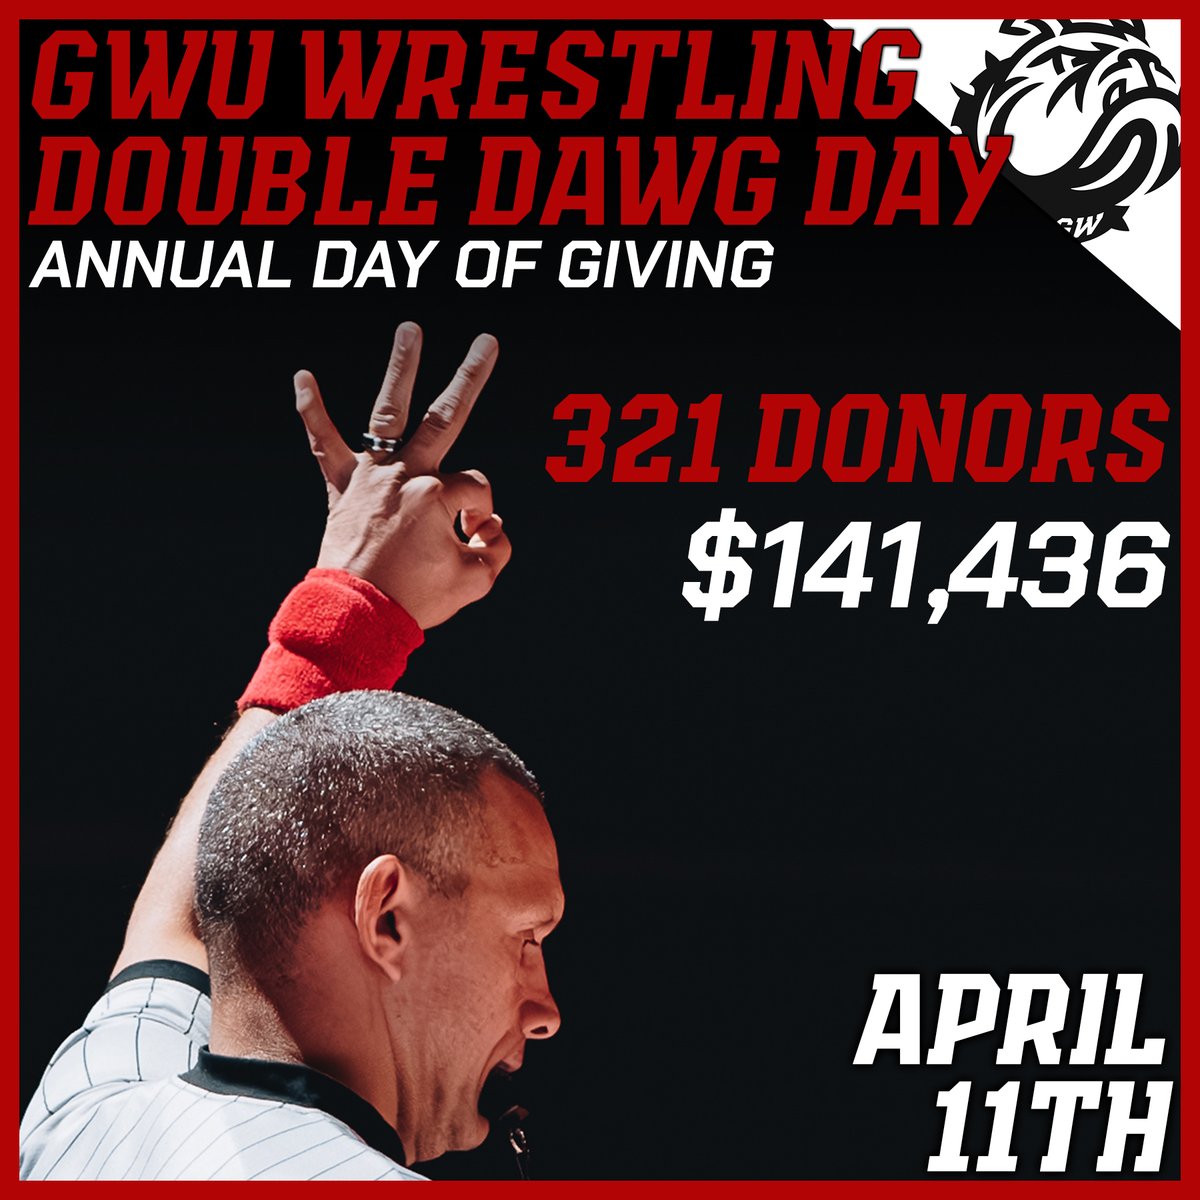 3 Hours left of #DoubleDawgDay. And ya'll keep showing up! Amazing show of support today. give.gardner-webb.edu/schools/Gardne…